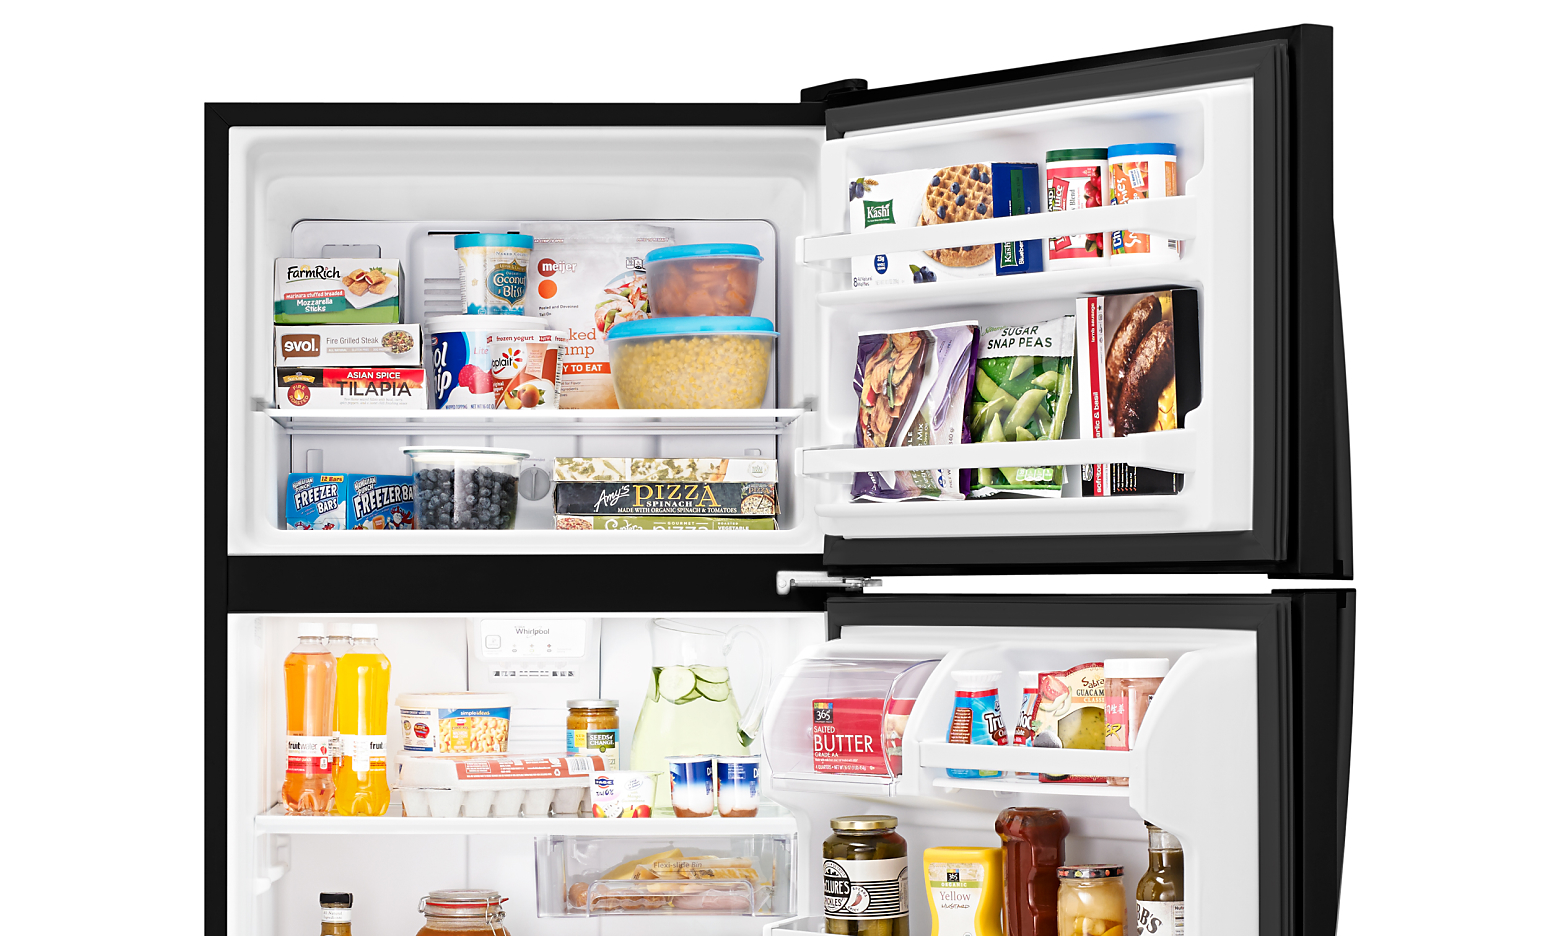 Refrigerator with top freezer opened on top and bottom to show organization